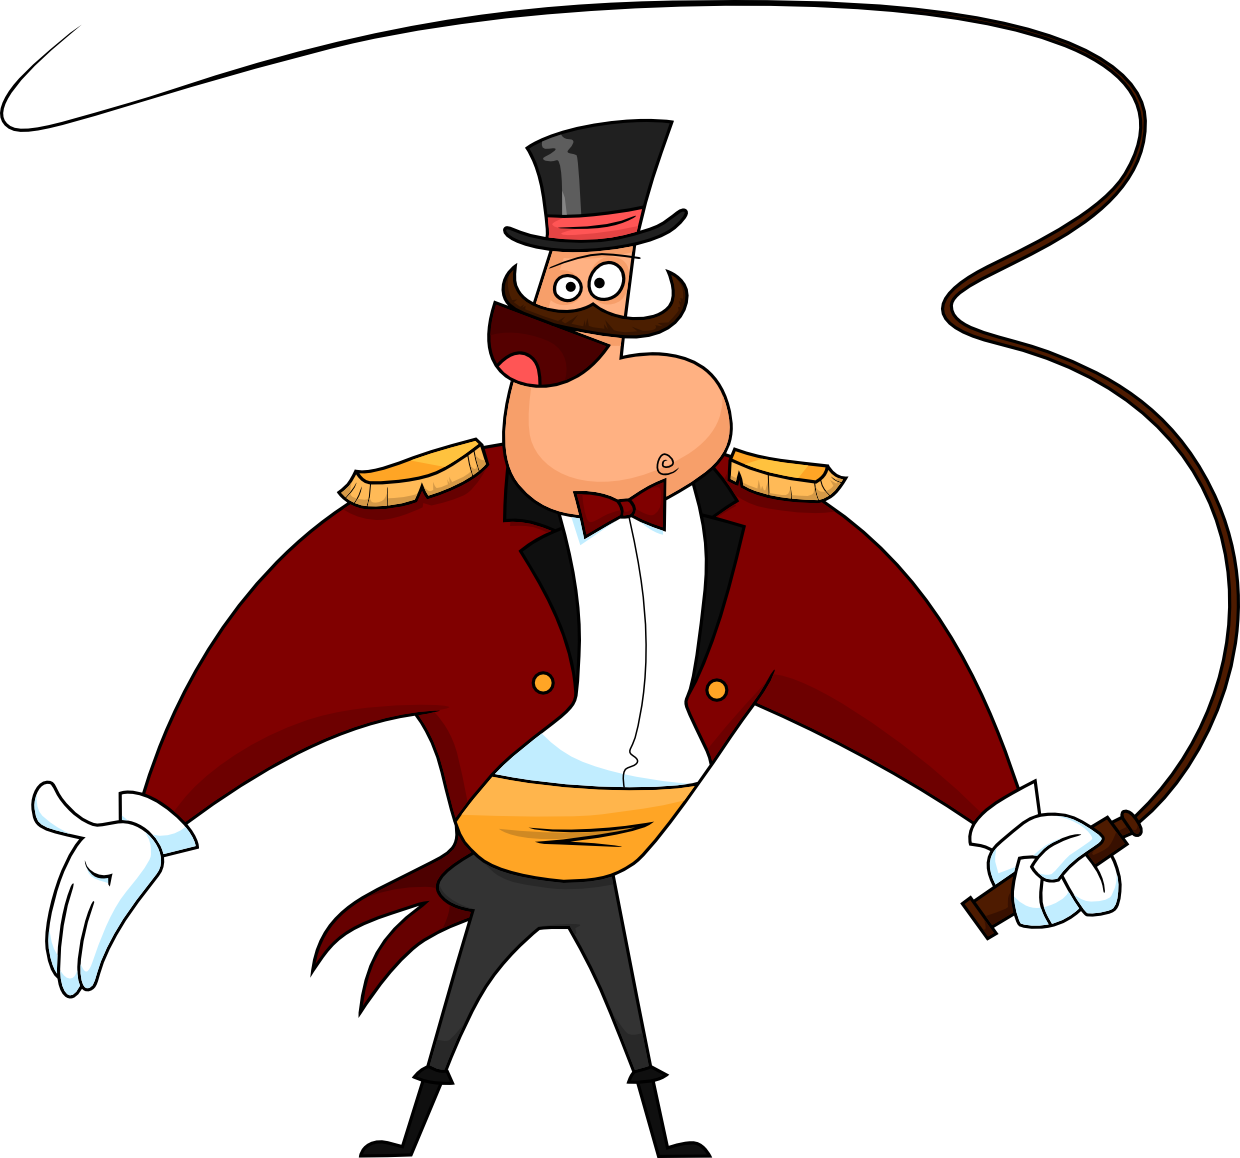 Images of drawing spacehero. Whip clipart circus ringmaster